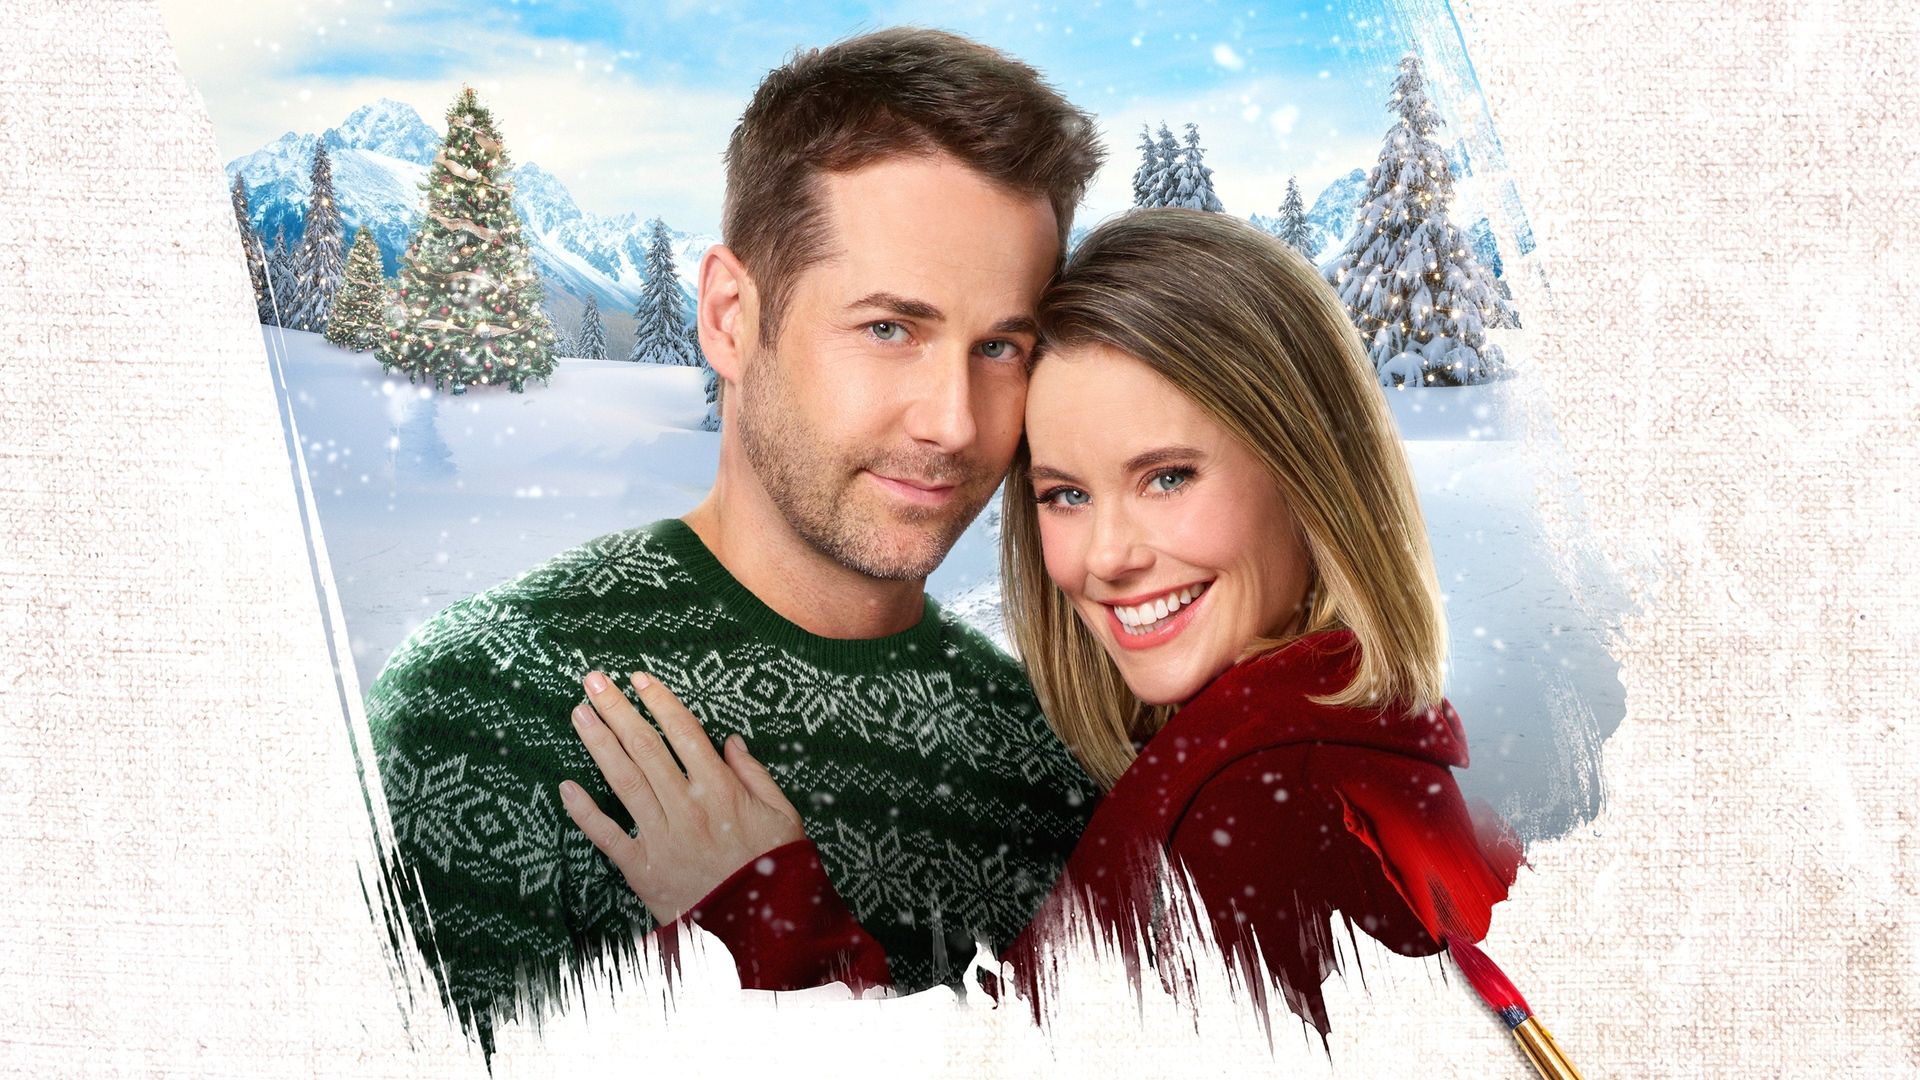 Never Kiss a Man in a Christmas Sweater background